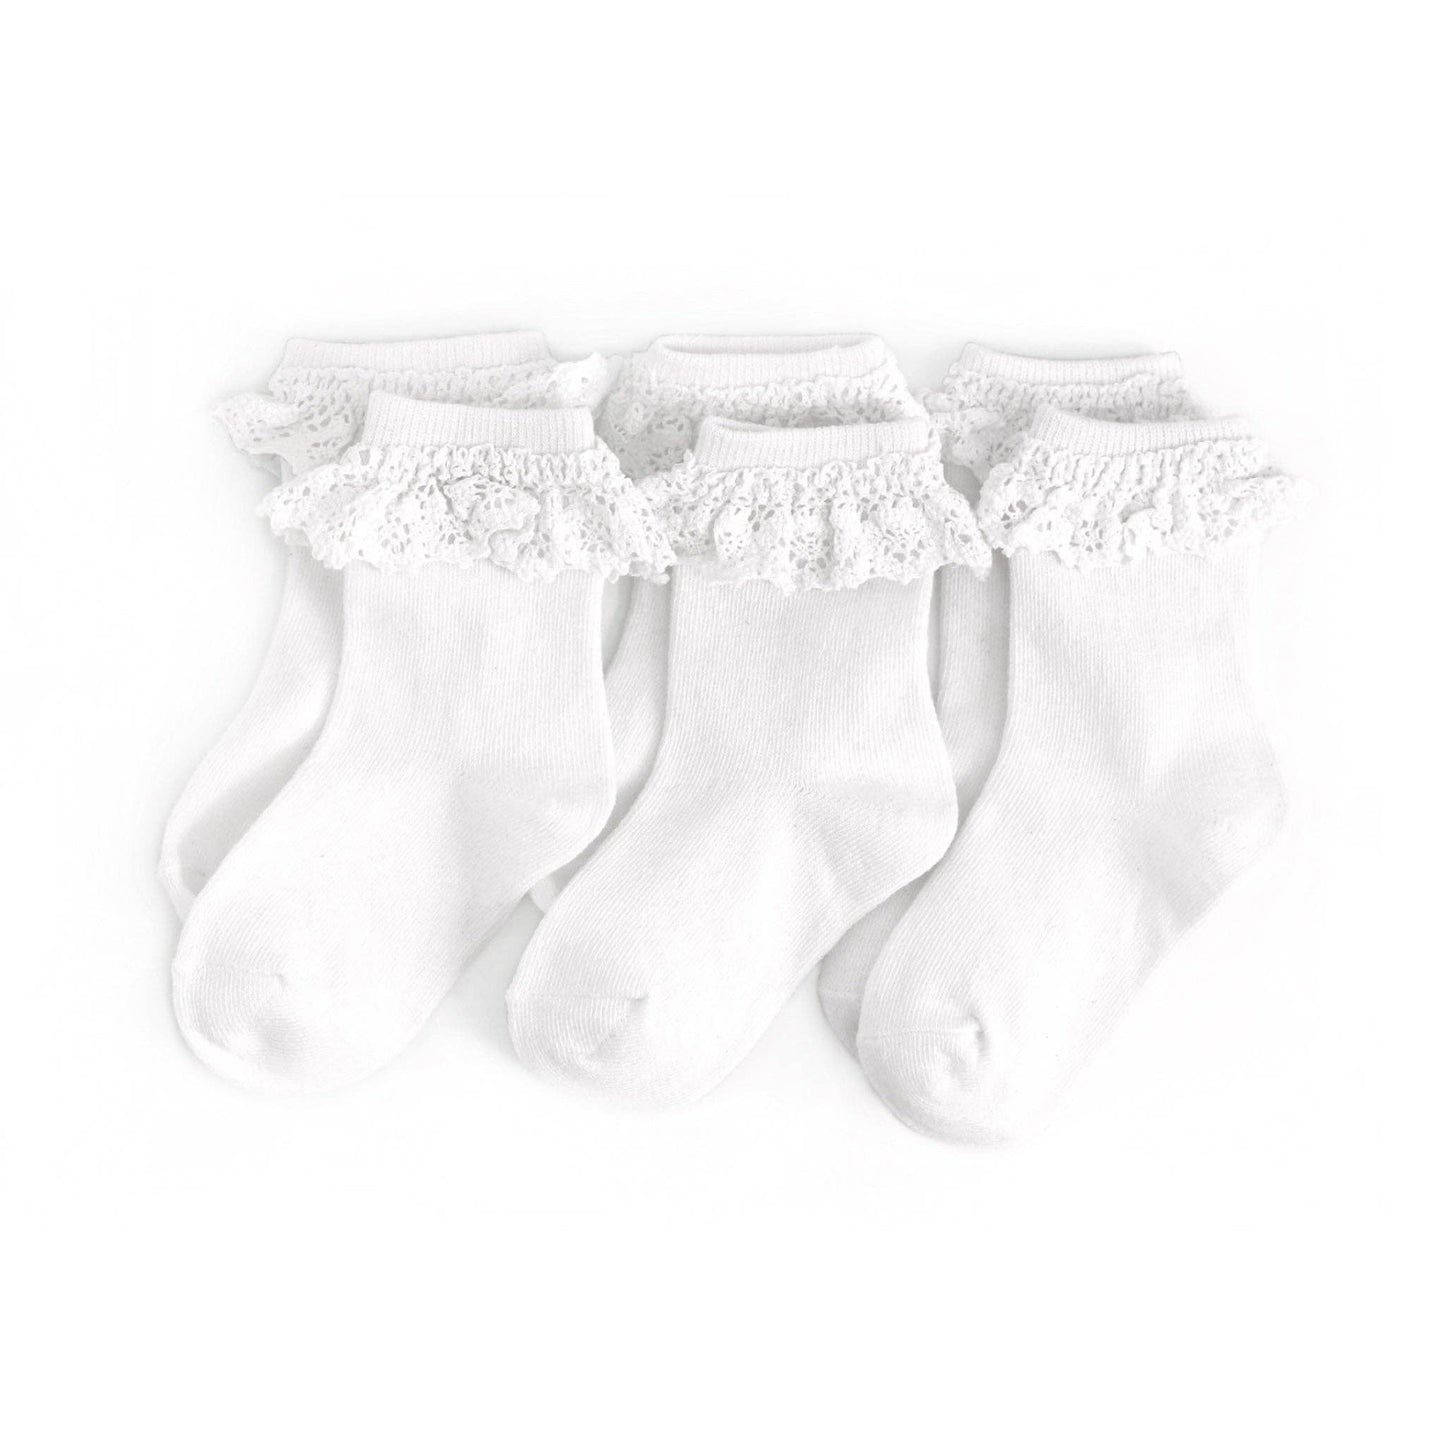 Little Stocking Co. - White Lace Midi Sock 3-Pack: 6-18 MONTHS